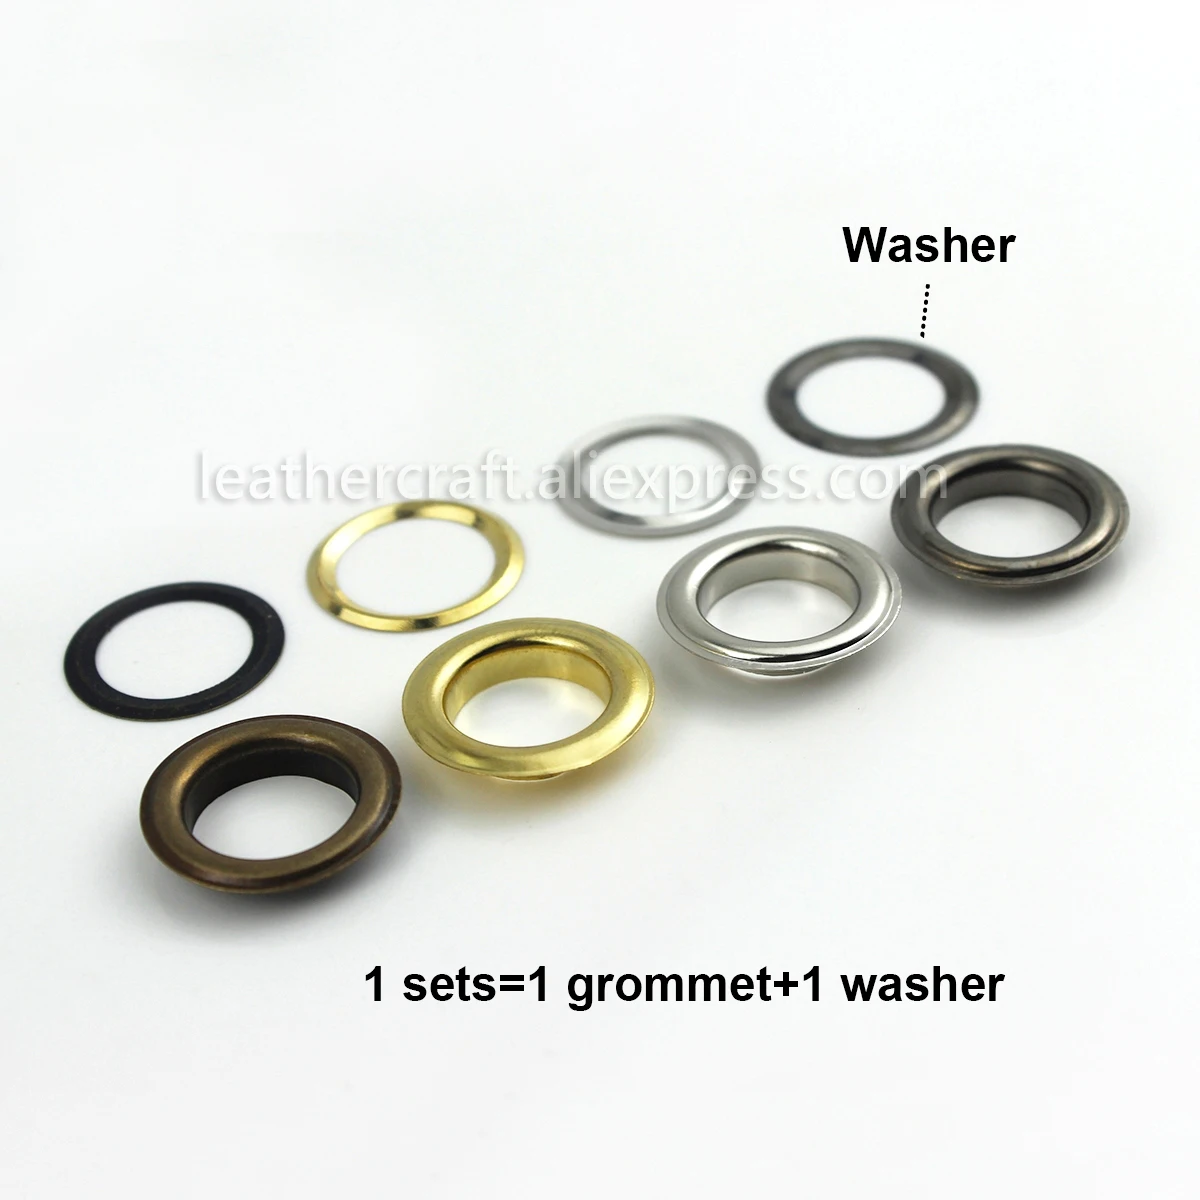 8mm Curtain Eyelet Rings Metal Brass Round Grommets Leather Crafts sfgf 